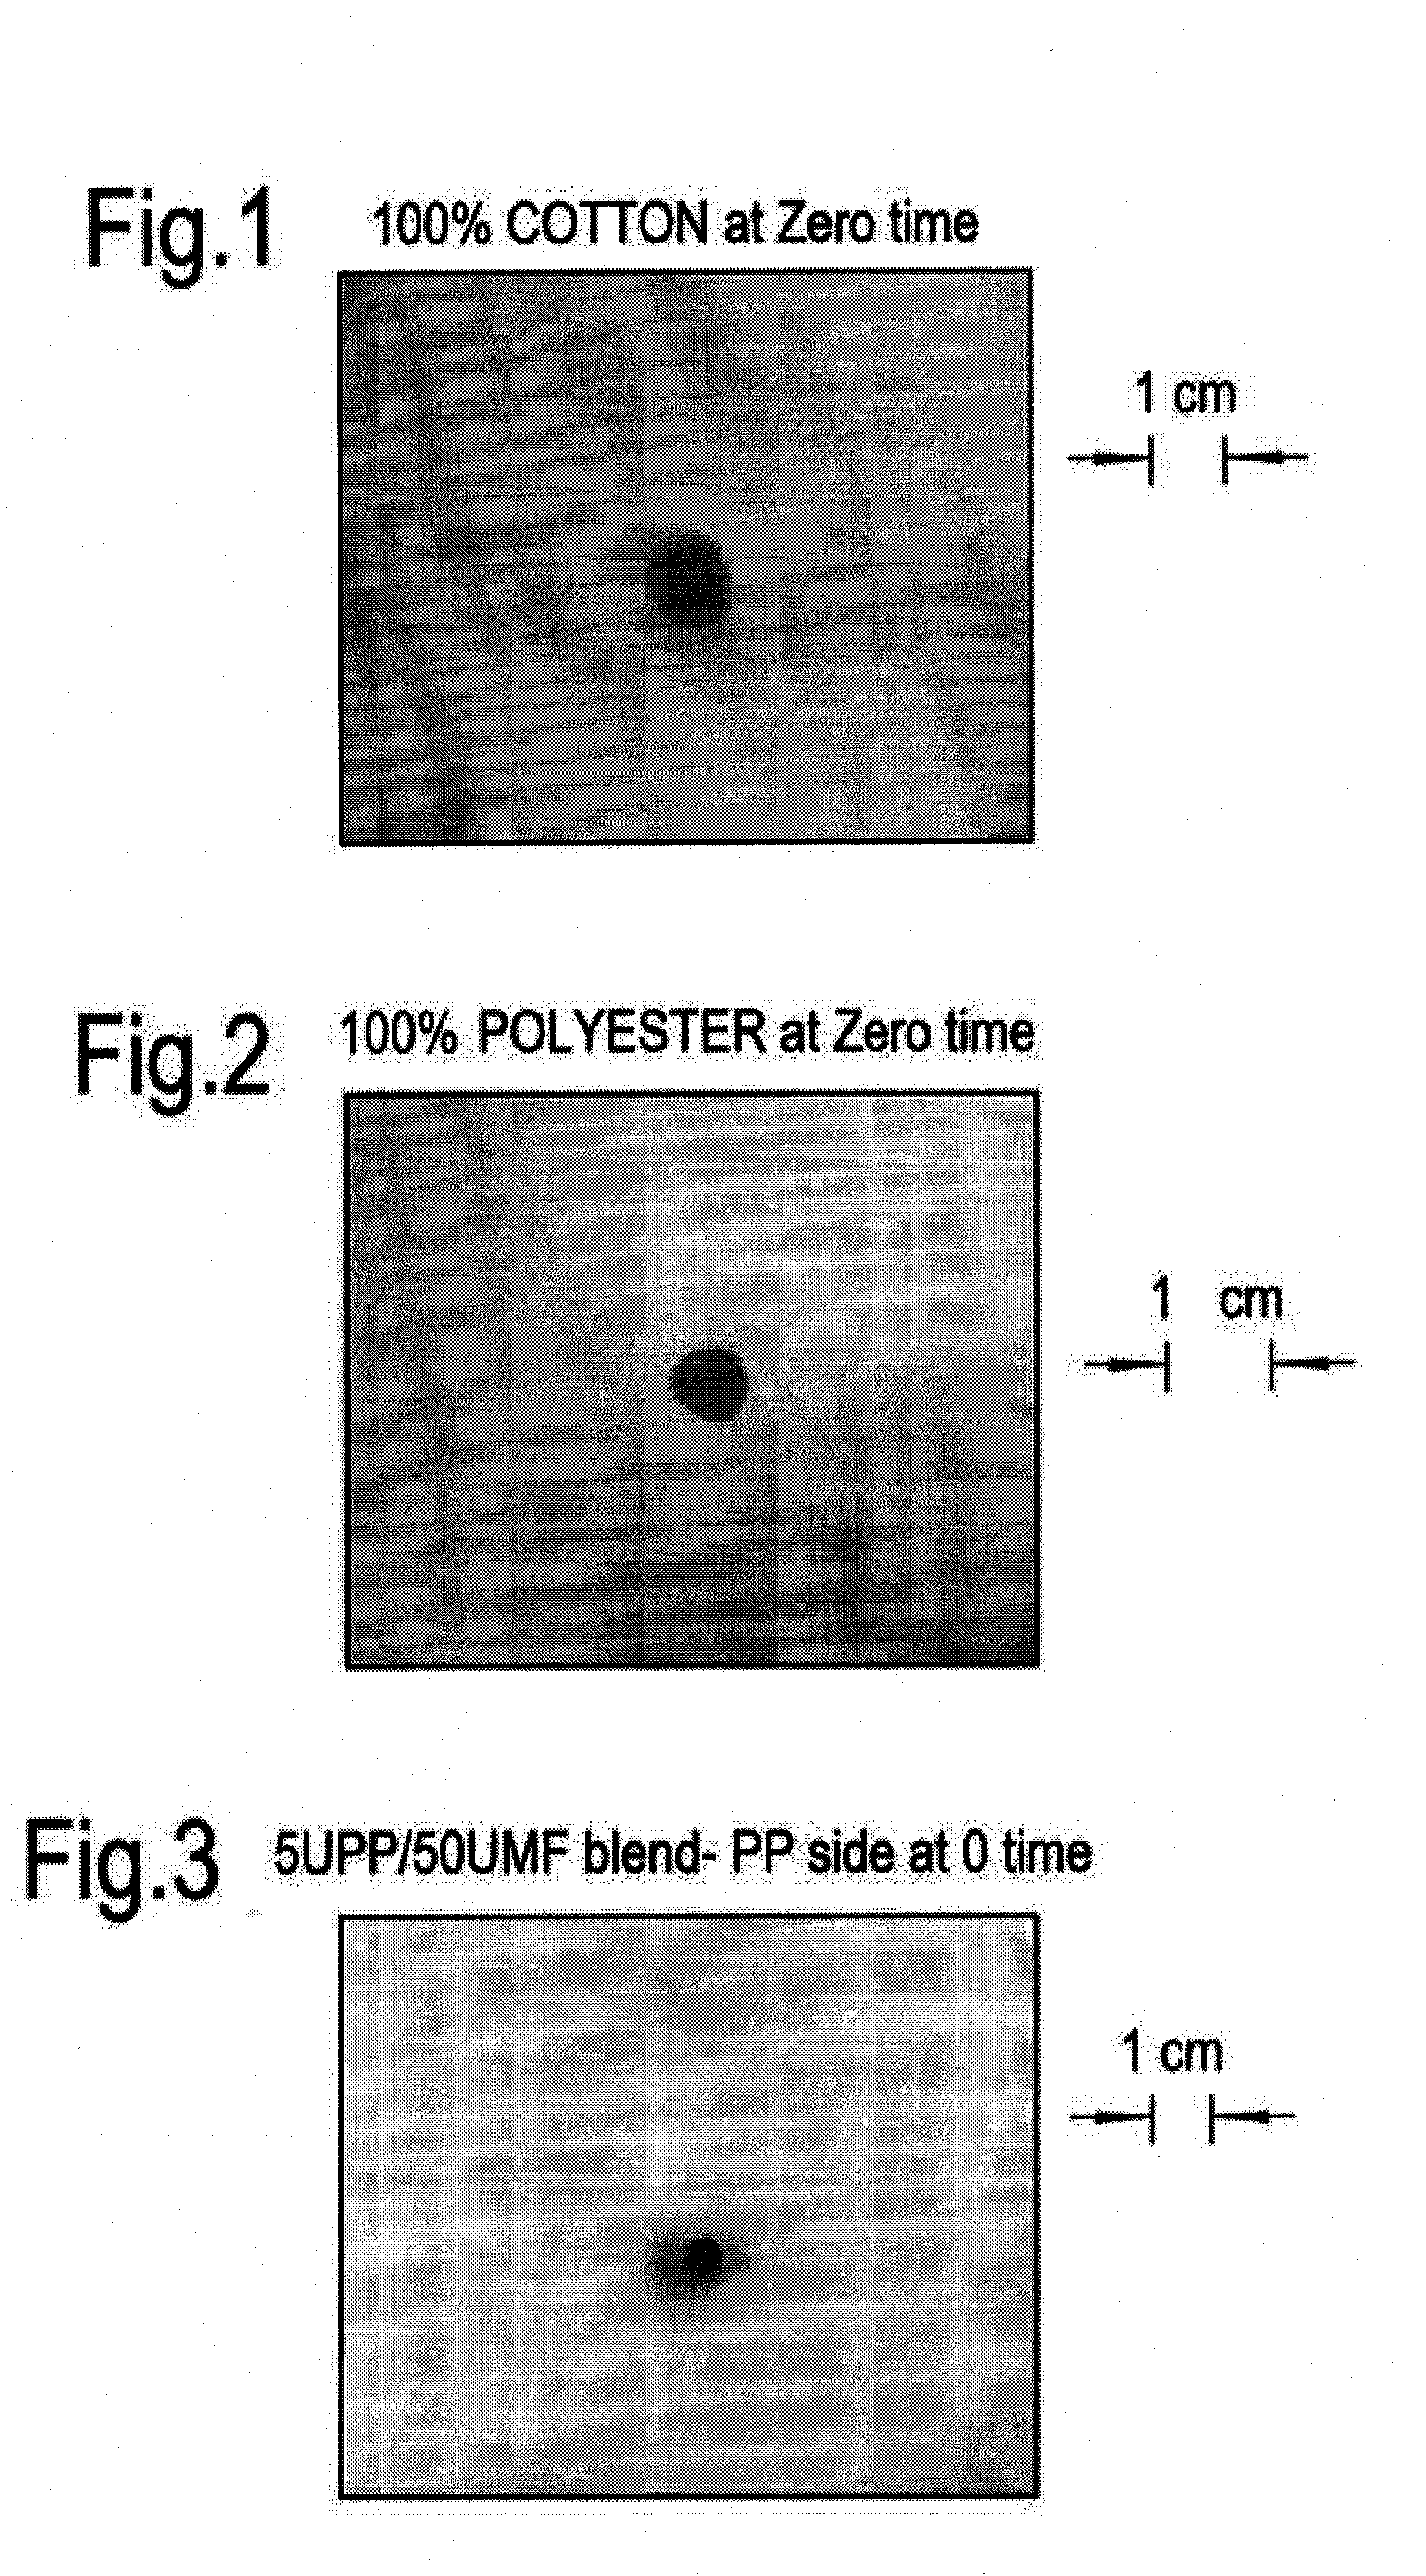 A multi-component combination yarn system for moisture management in textiles and system for producing same